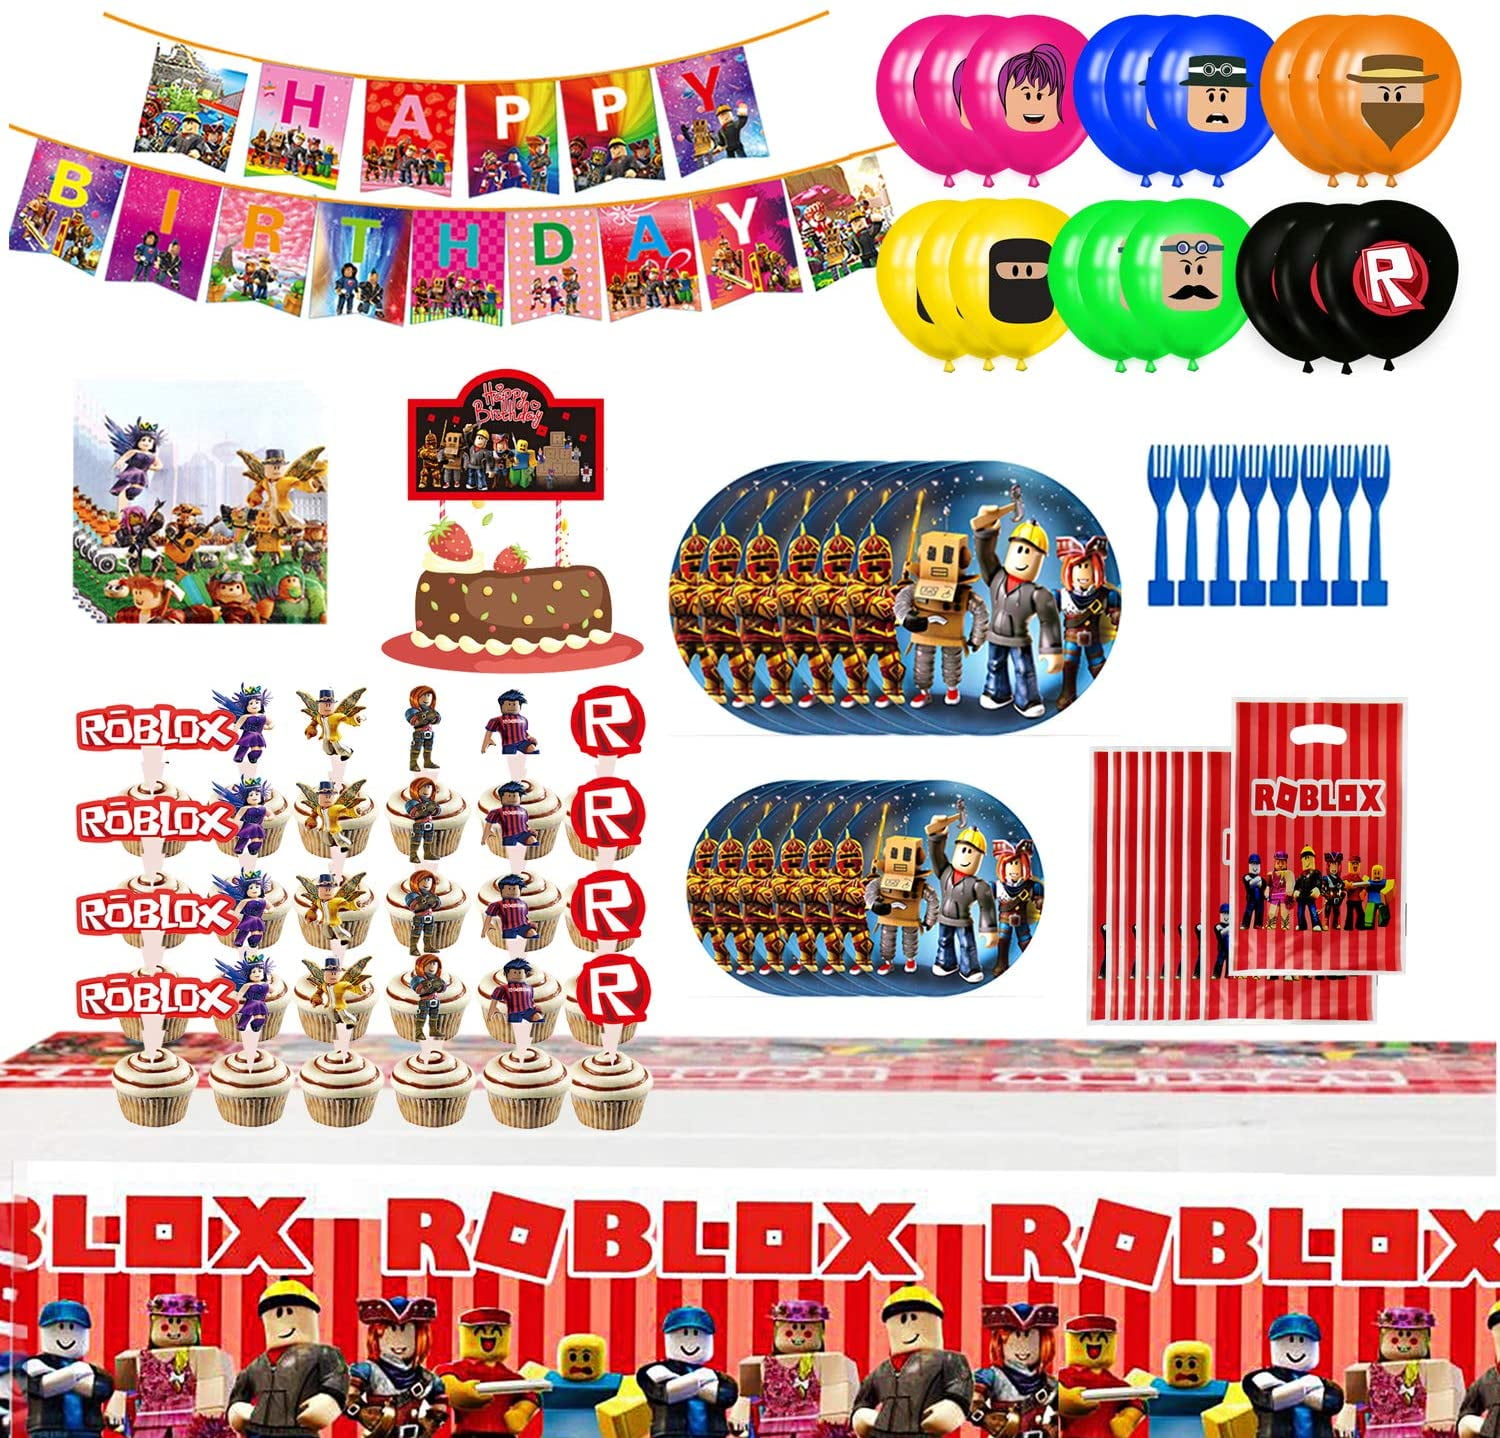 105 Pcs Roblox Birthday Party Supplies Robot Blocks Party Decorations Banners Cake Topper Plates Forks Gift Bags Cupcake Toppers Tablecover Napkins And Balloons Walmart Com Walmart Com